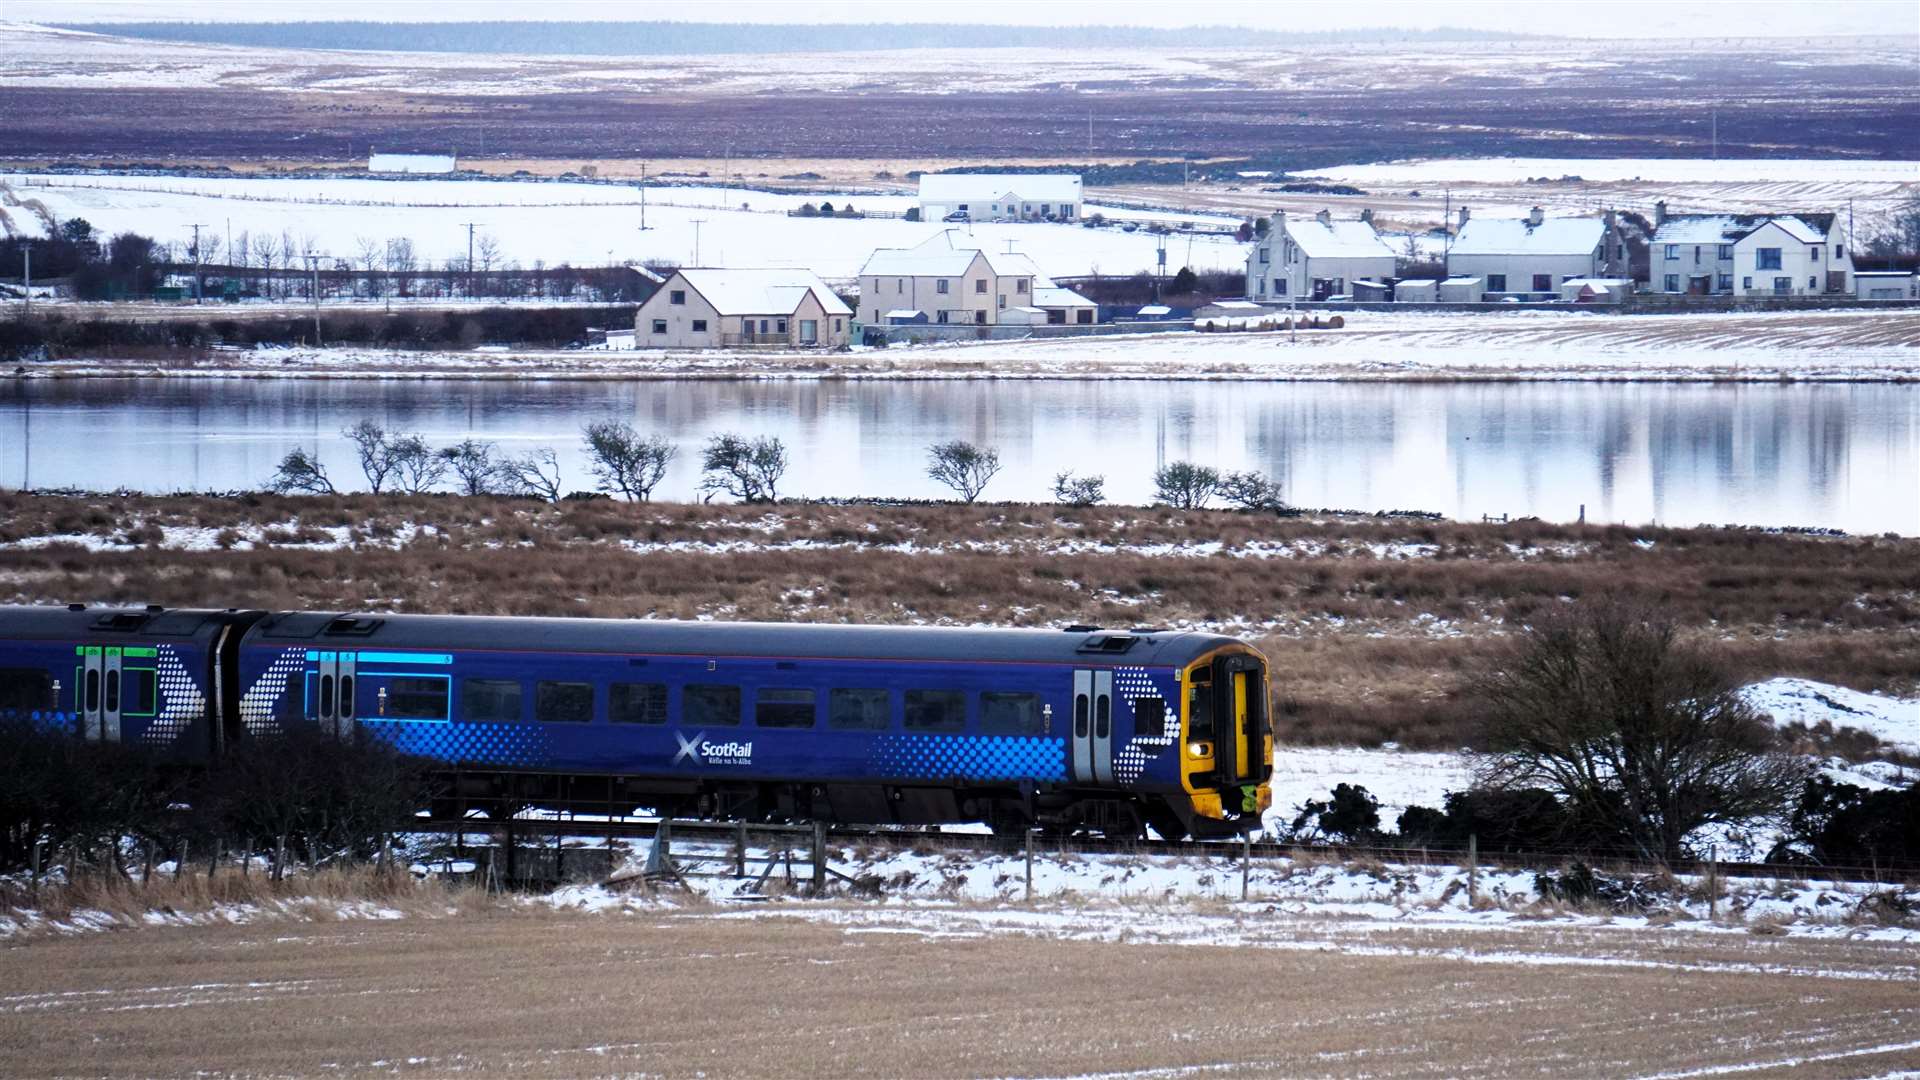 Train in snow at Watten. Picture: DGS